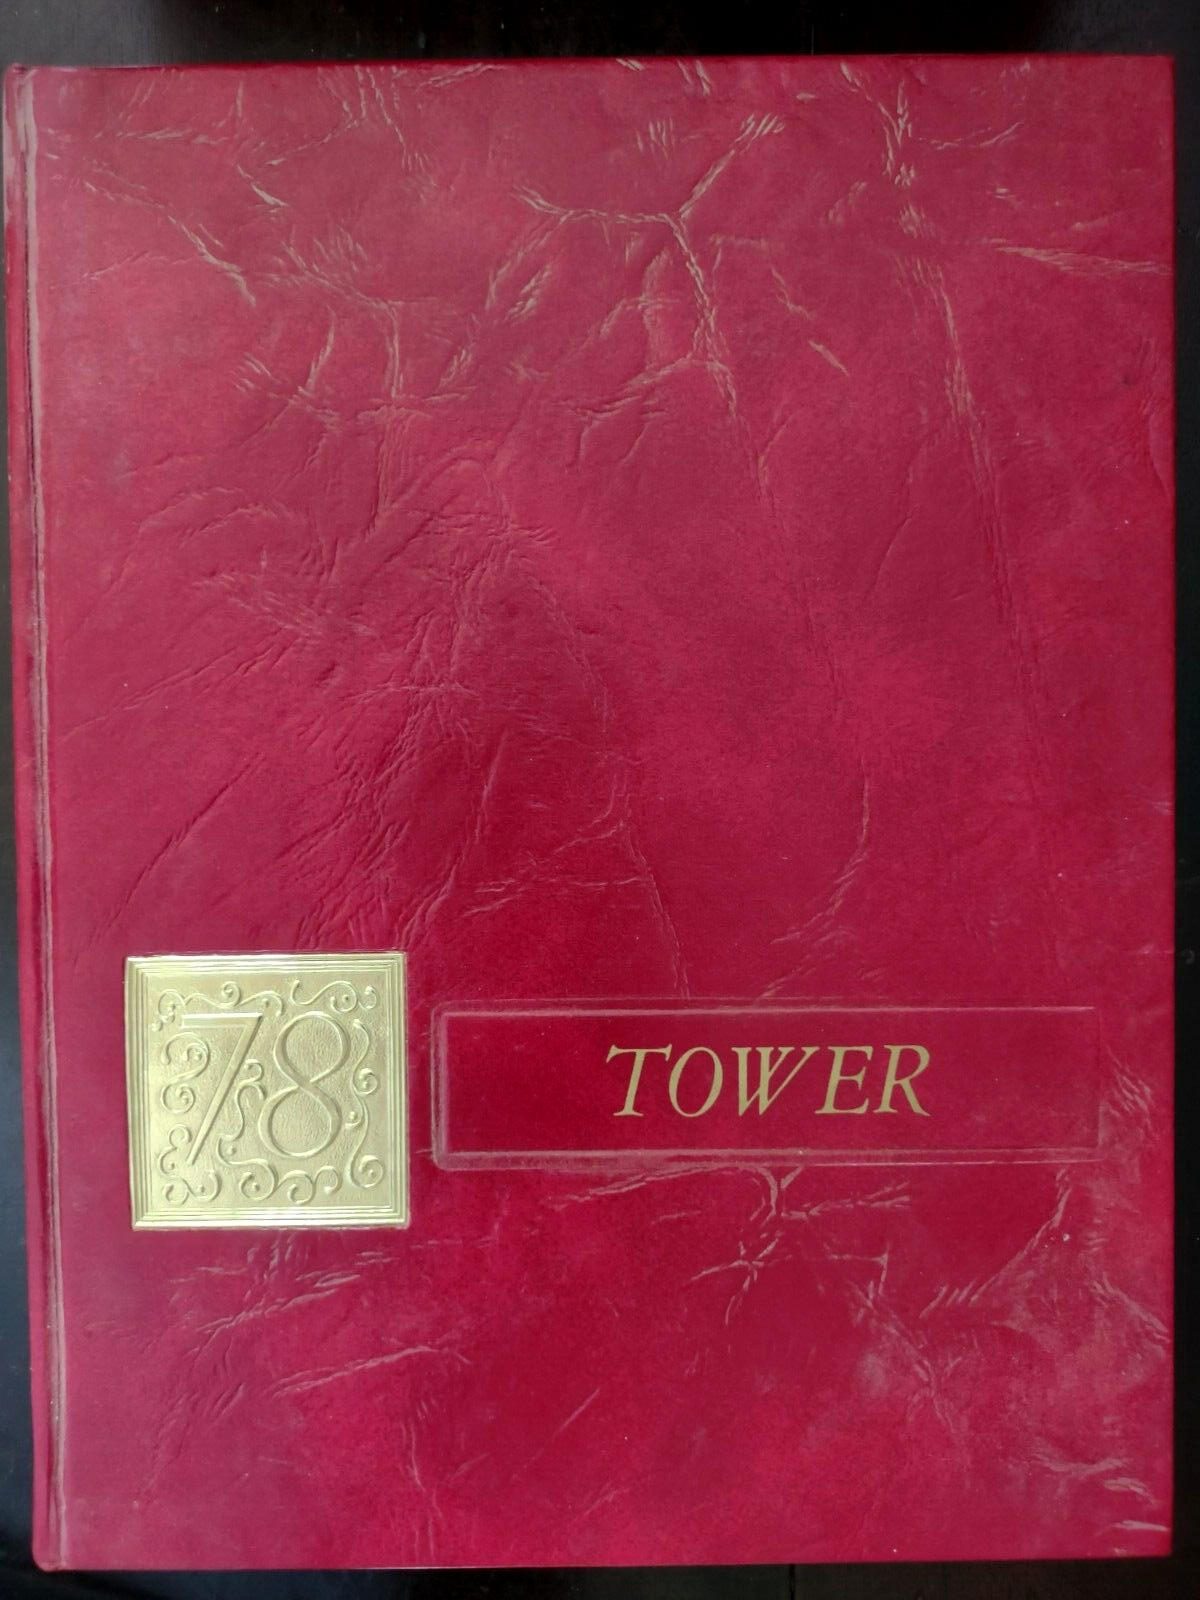 1978 Amherst Central High School Snyder NY Yearbook - THE TOWER